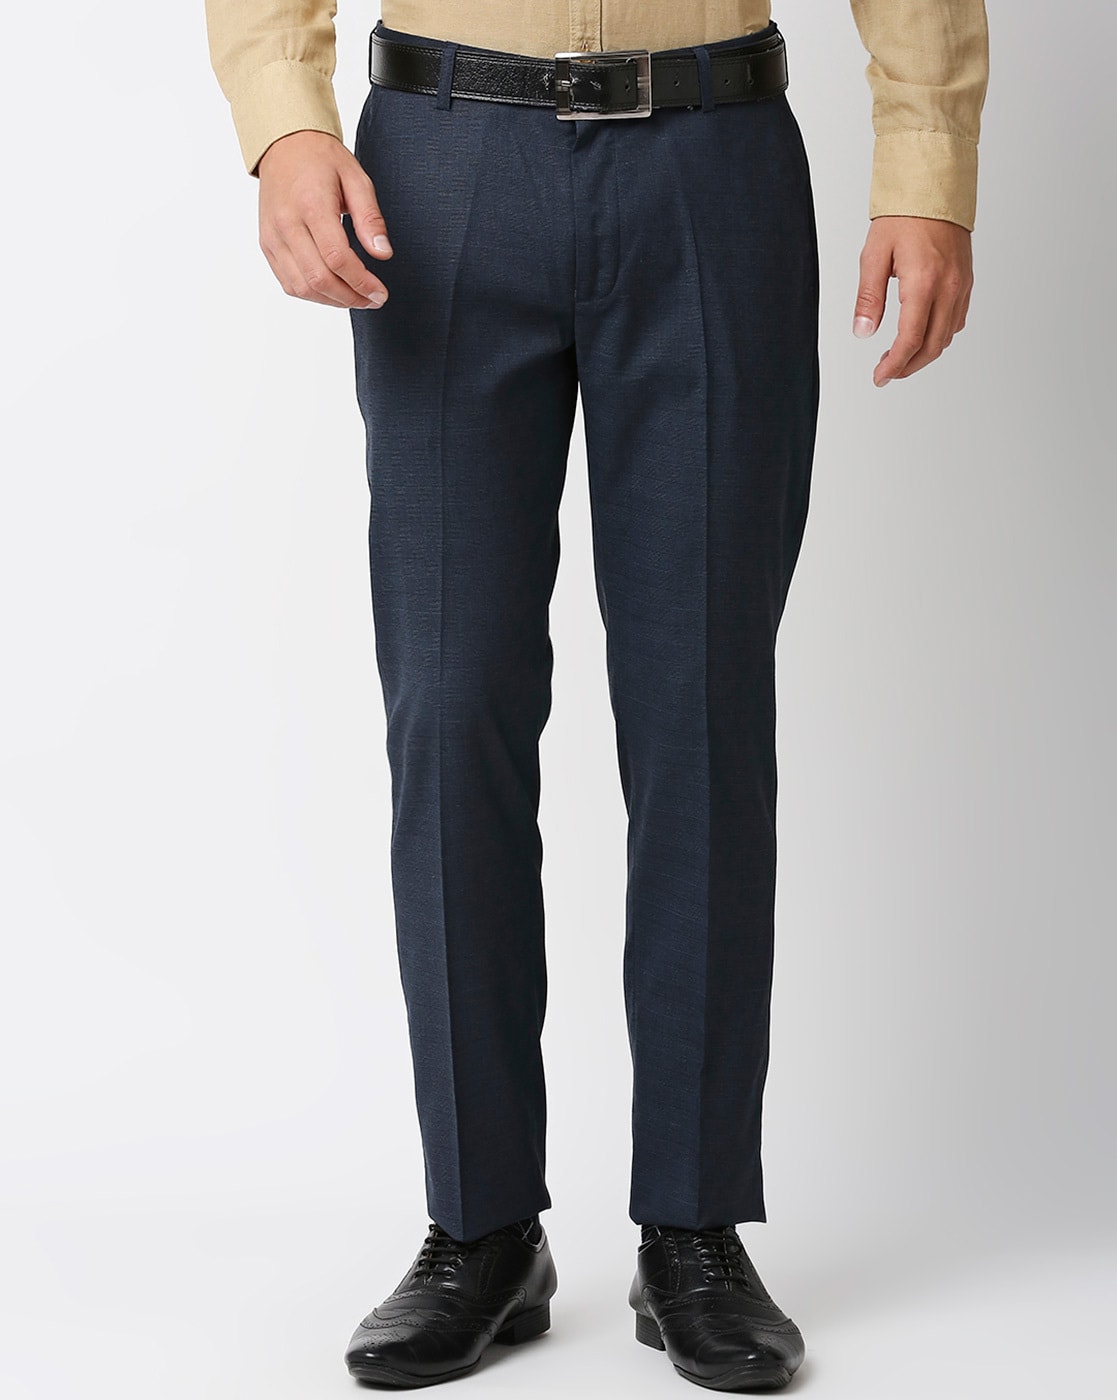 Relaxed Fit Black Twill Suit Pant  RWCO